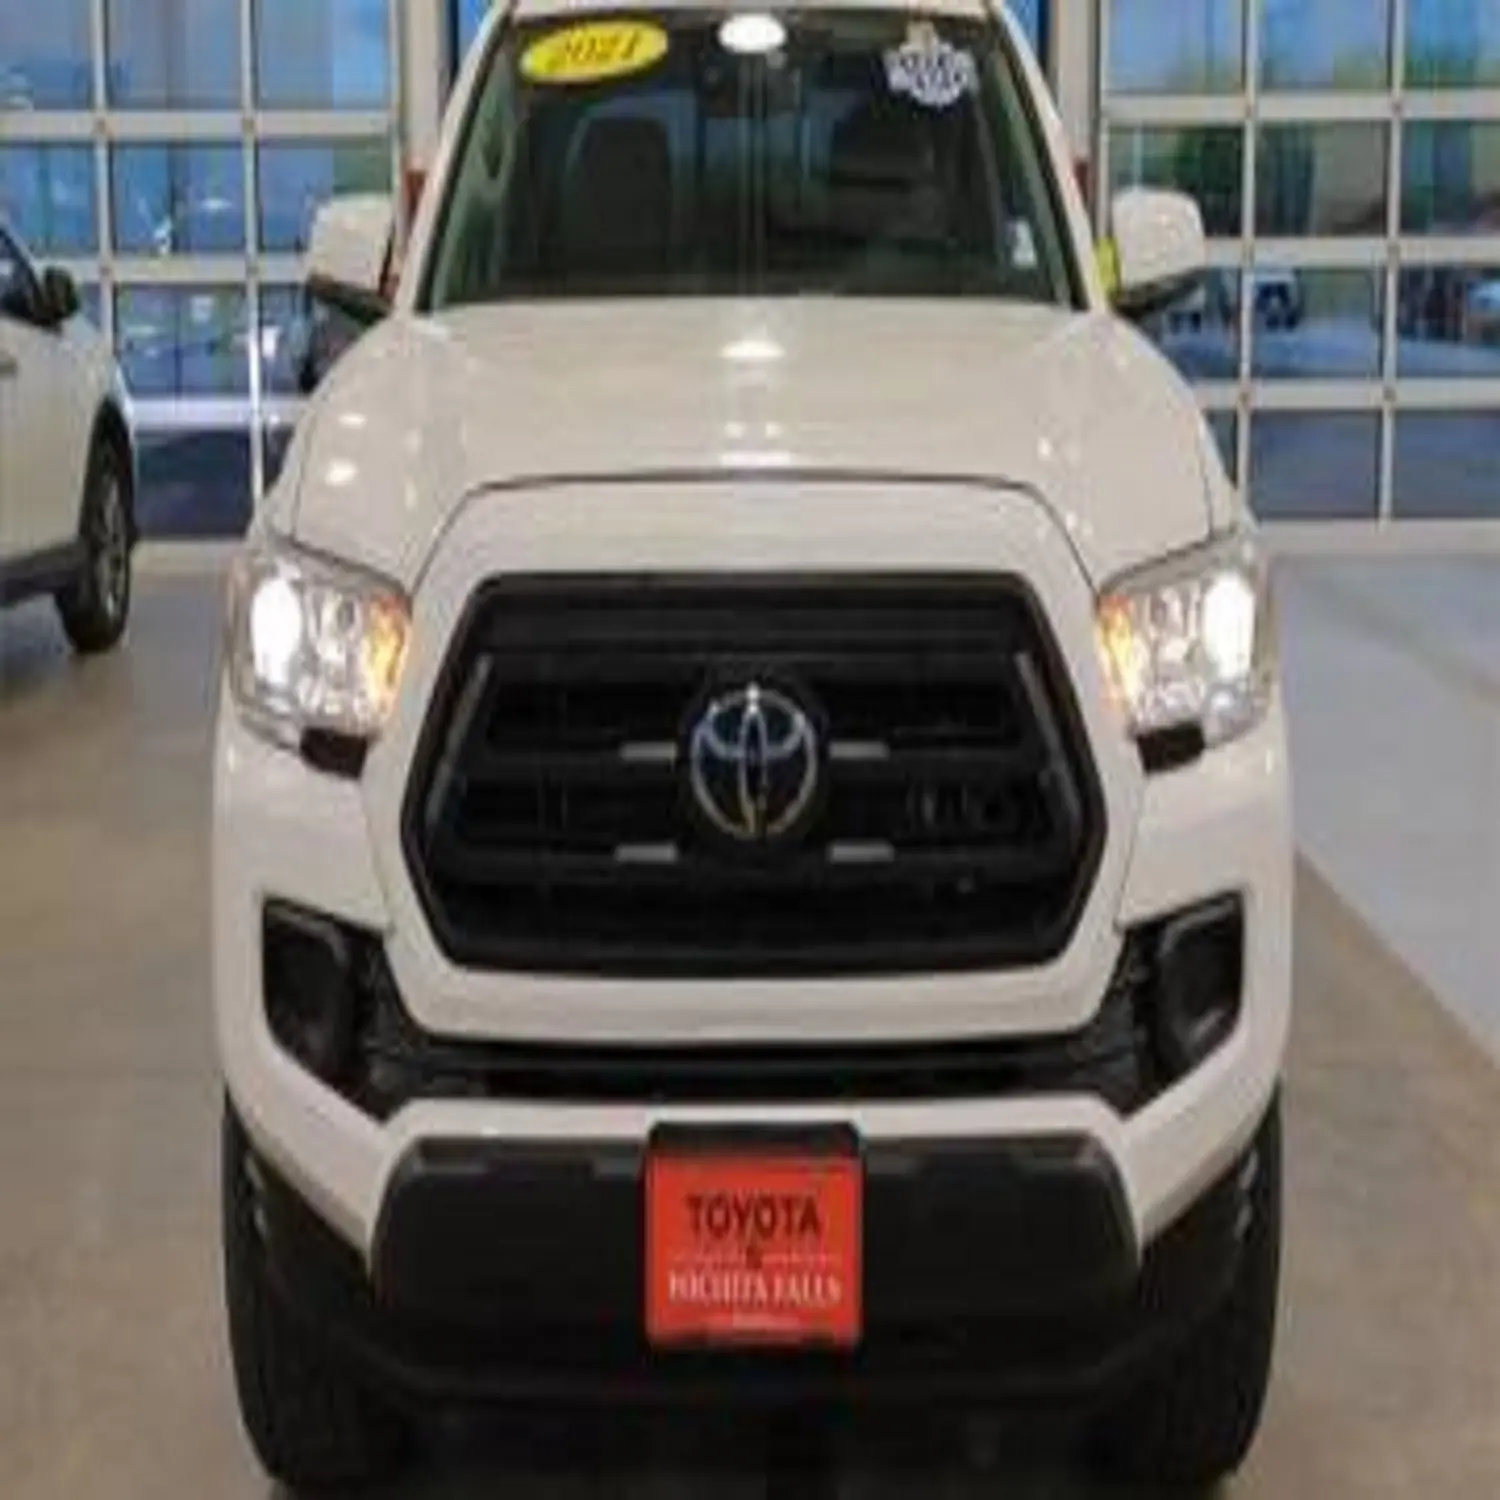 FAIRY USED 2021 USED TOYOTA TACOMA SR5 DOUBLE CABIN READY TO SHIP RHD&LHD AVAILABLE